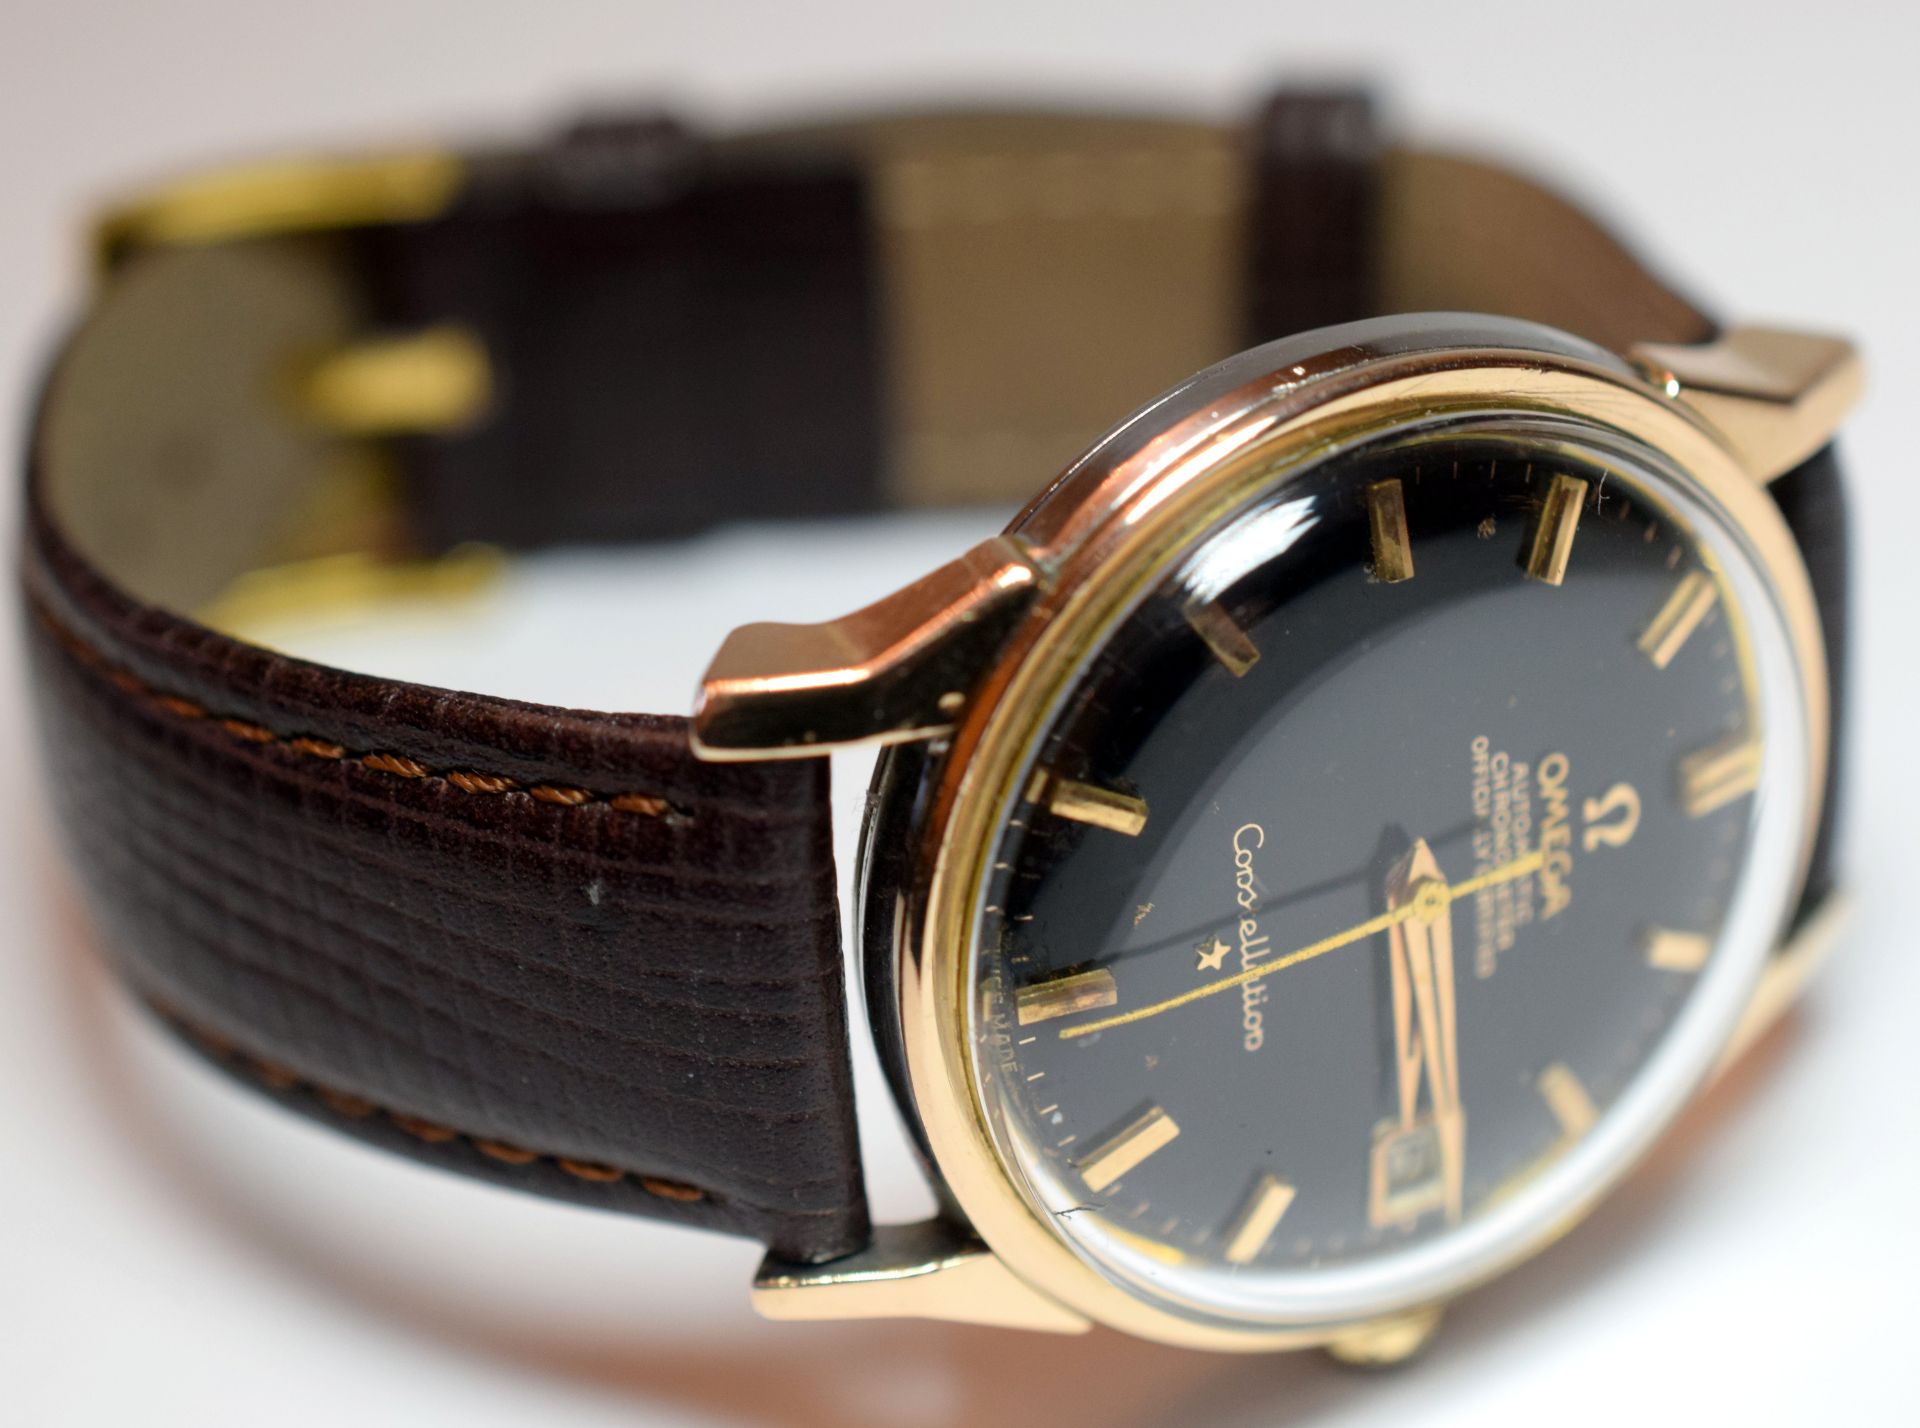 Omega Constellation Black Dial Gold Capped On Chrome c1960/70s ***Reserve Reduced*** - Image 2 of 8